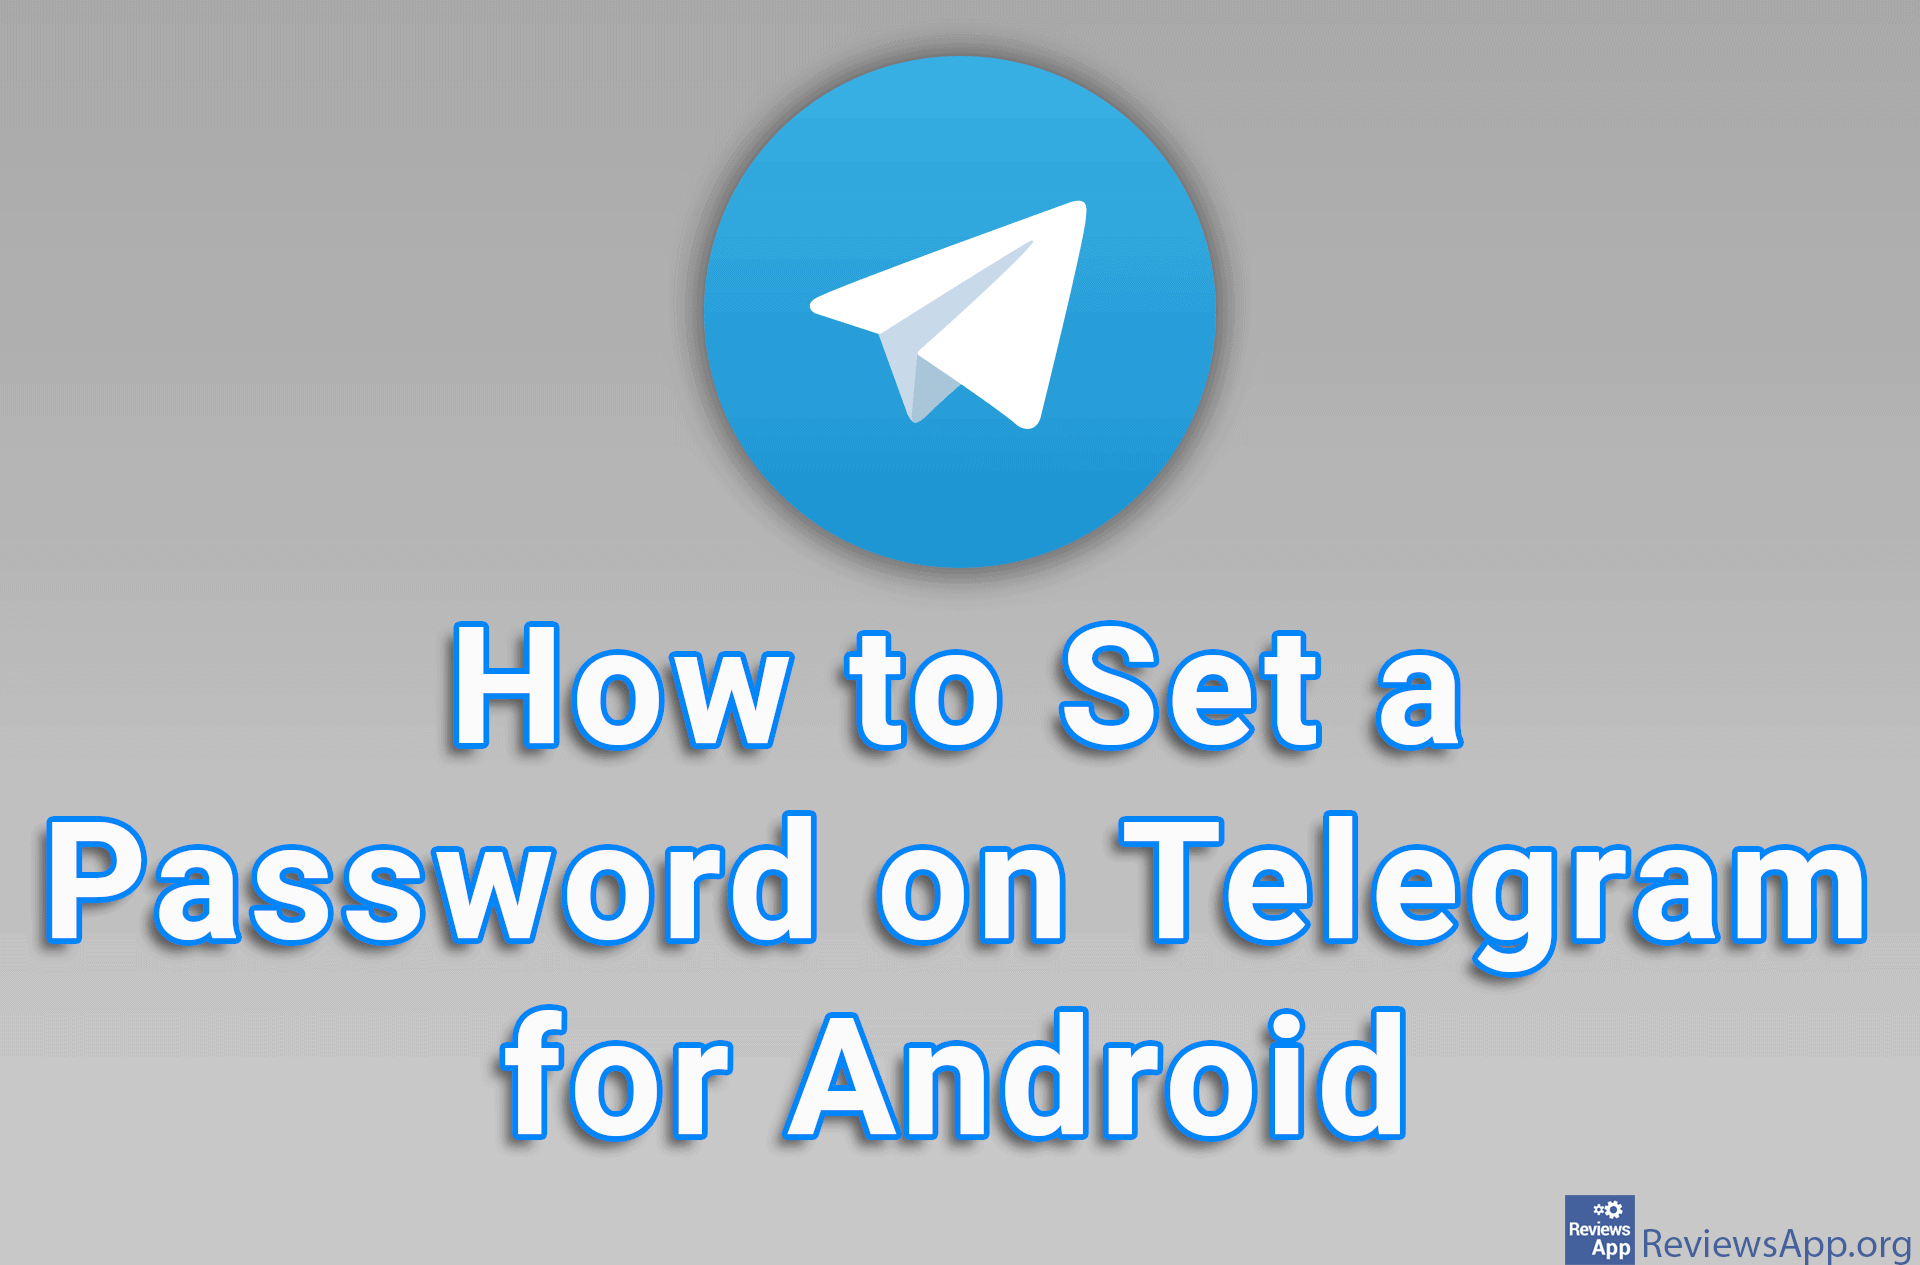 How to Set a Password on Telegram for Android